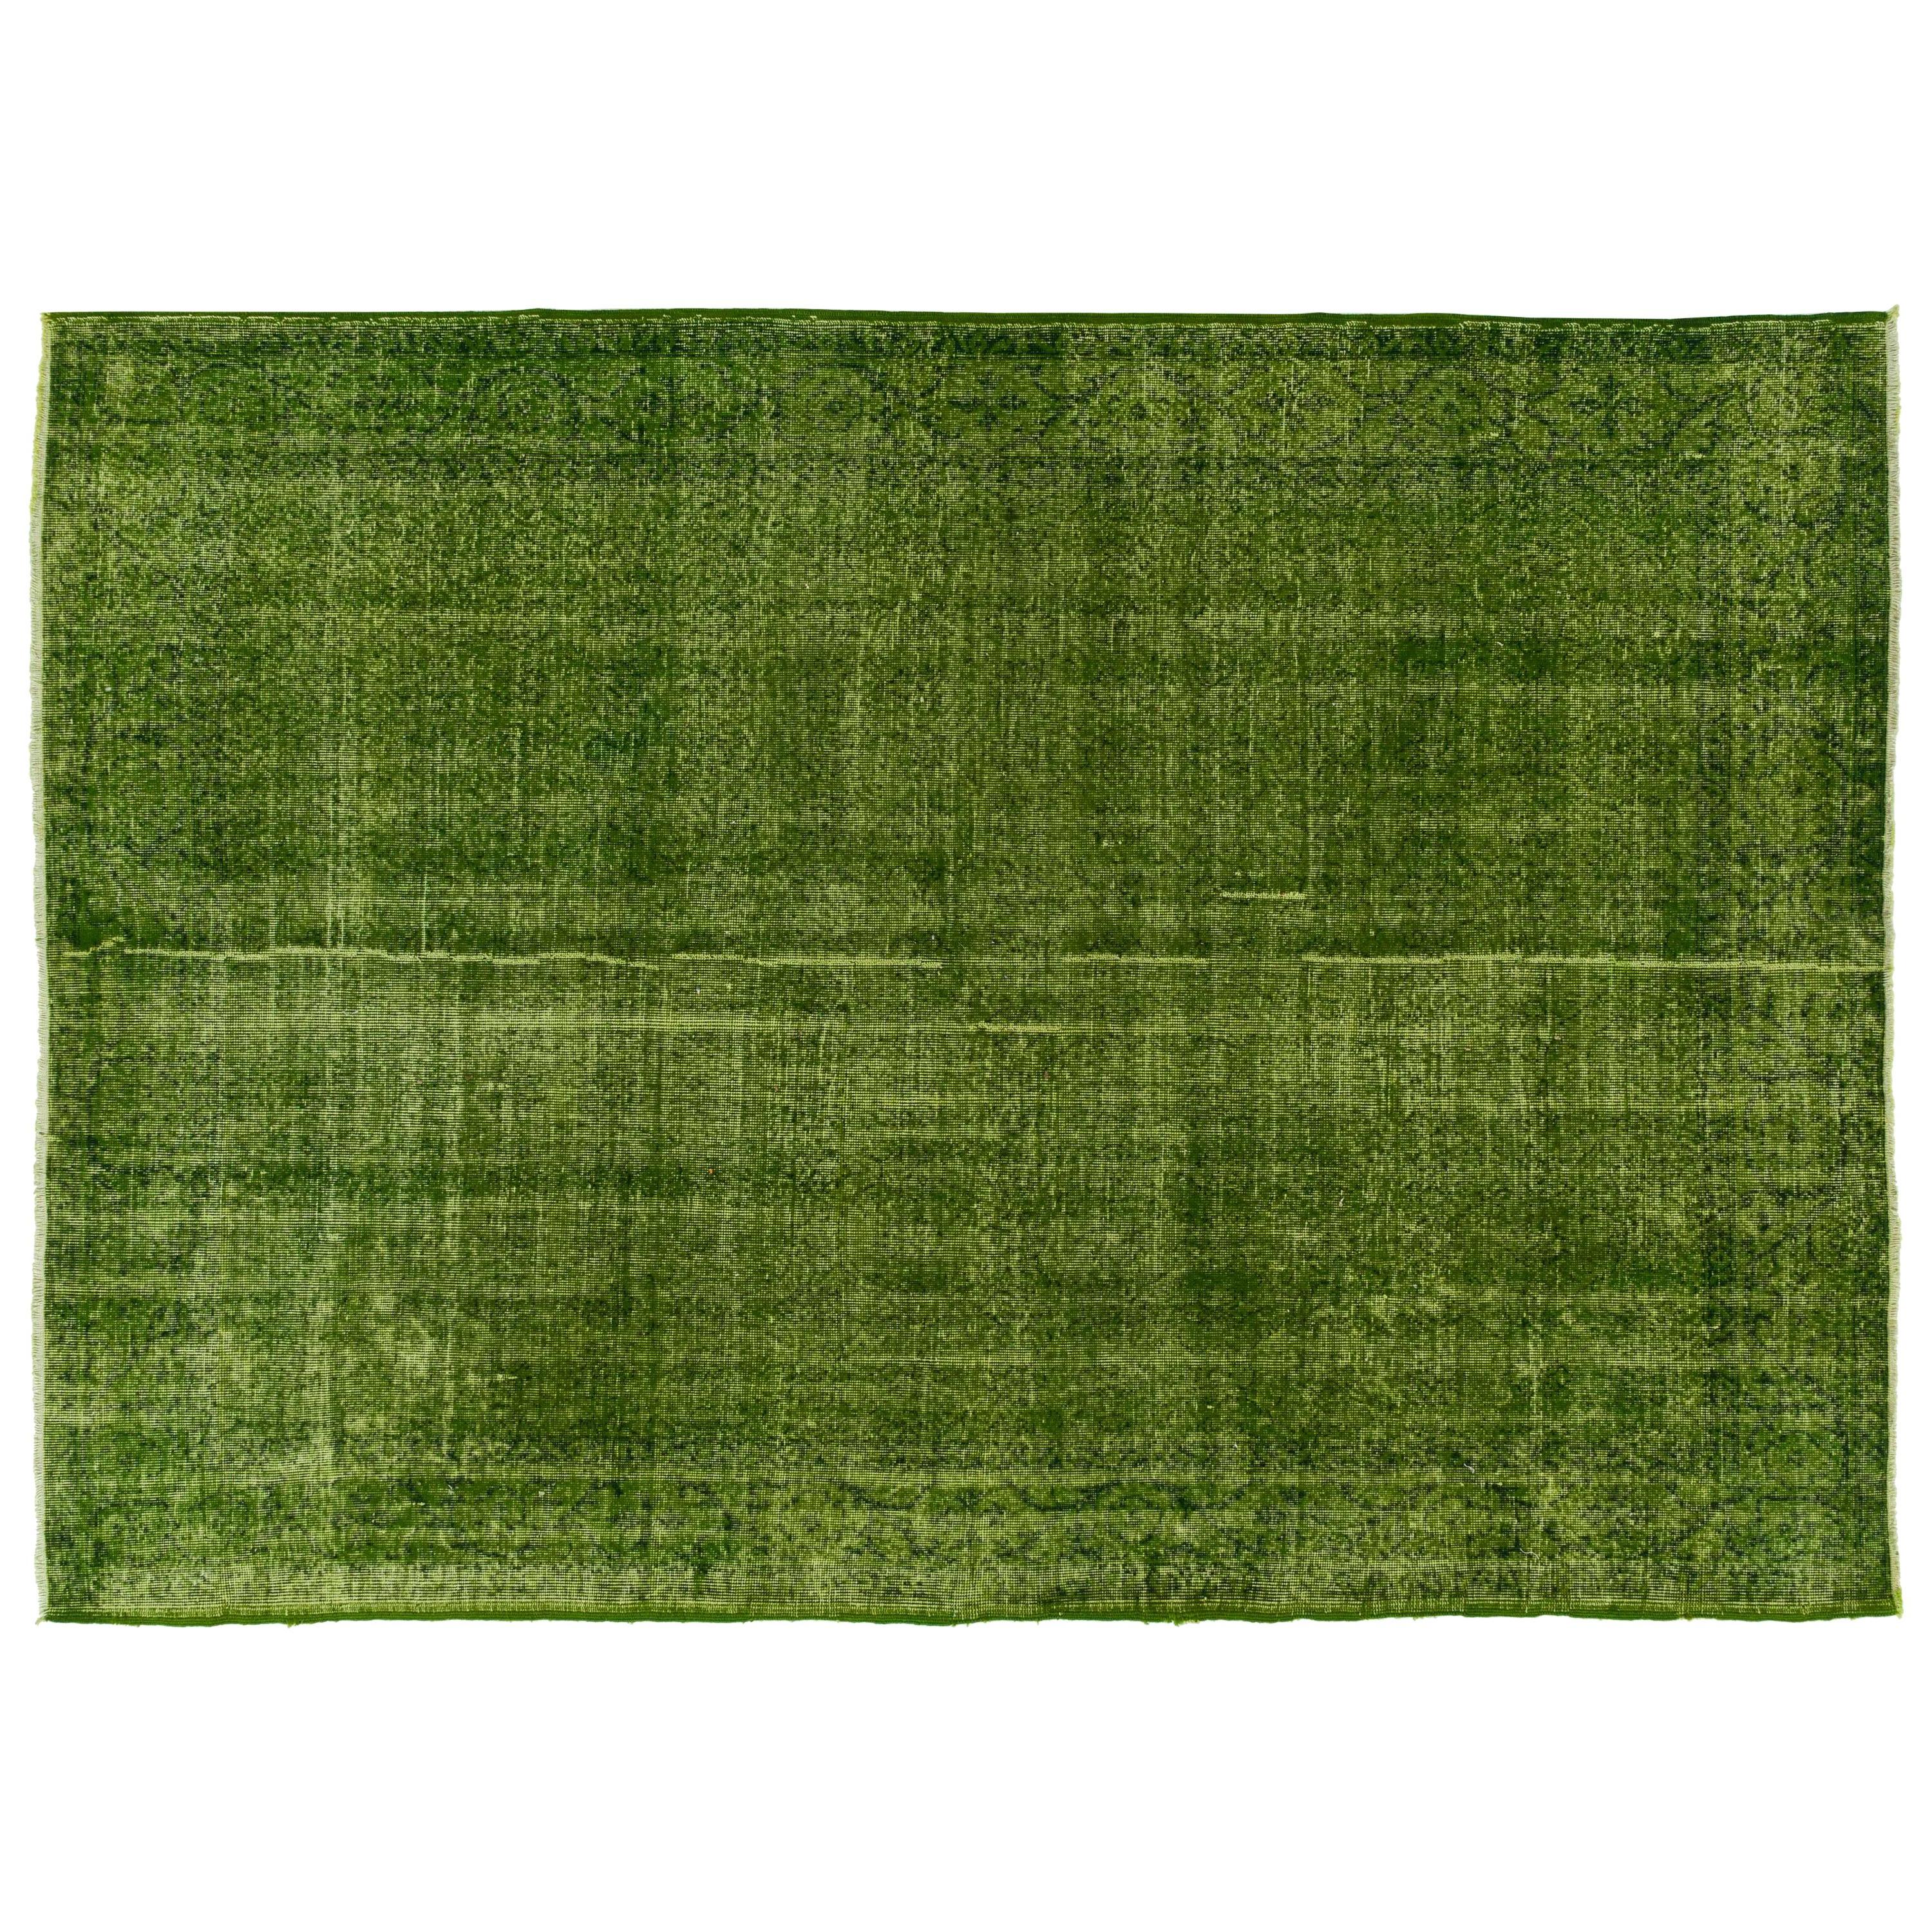 6.8x10 Ft Vintage Wool Rug OverDyed in Green Color. Great 4 Modern Interiors 1